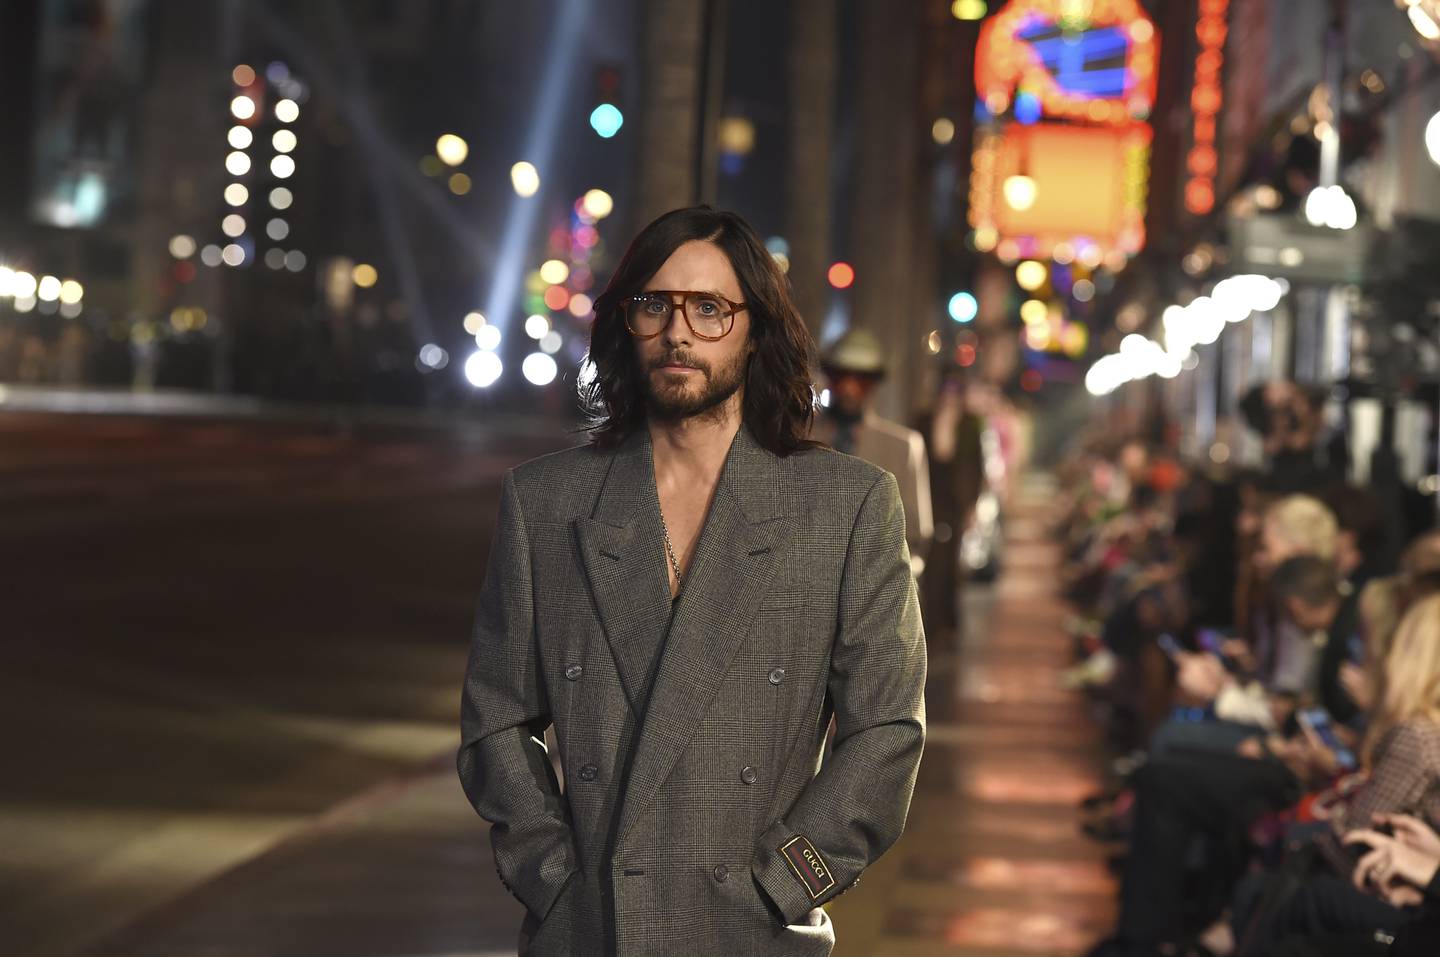 Actor Jared Leto walked the runway for the Gucci Love Parade fashion show in Los Angeles in November 2021. AP